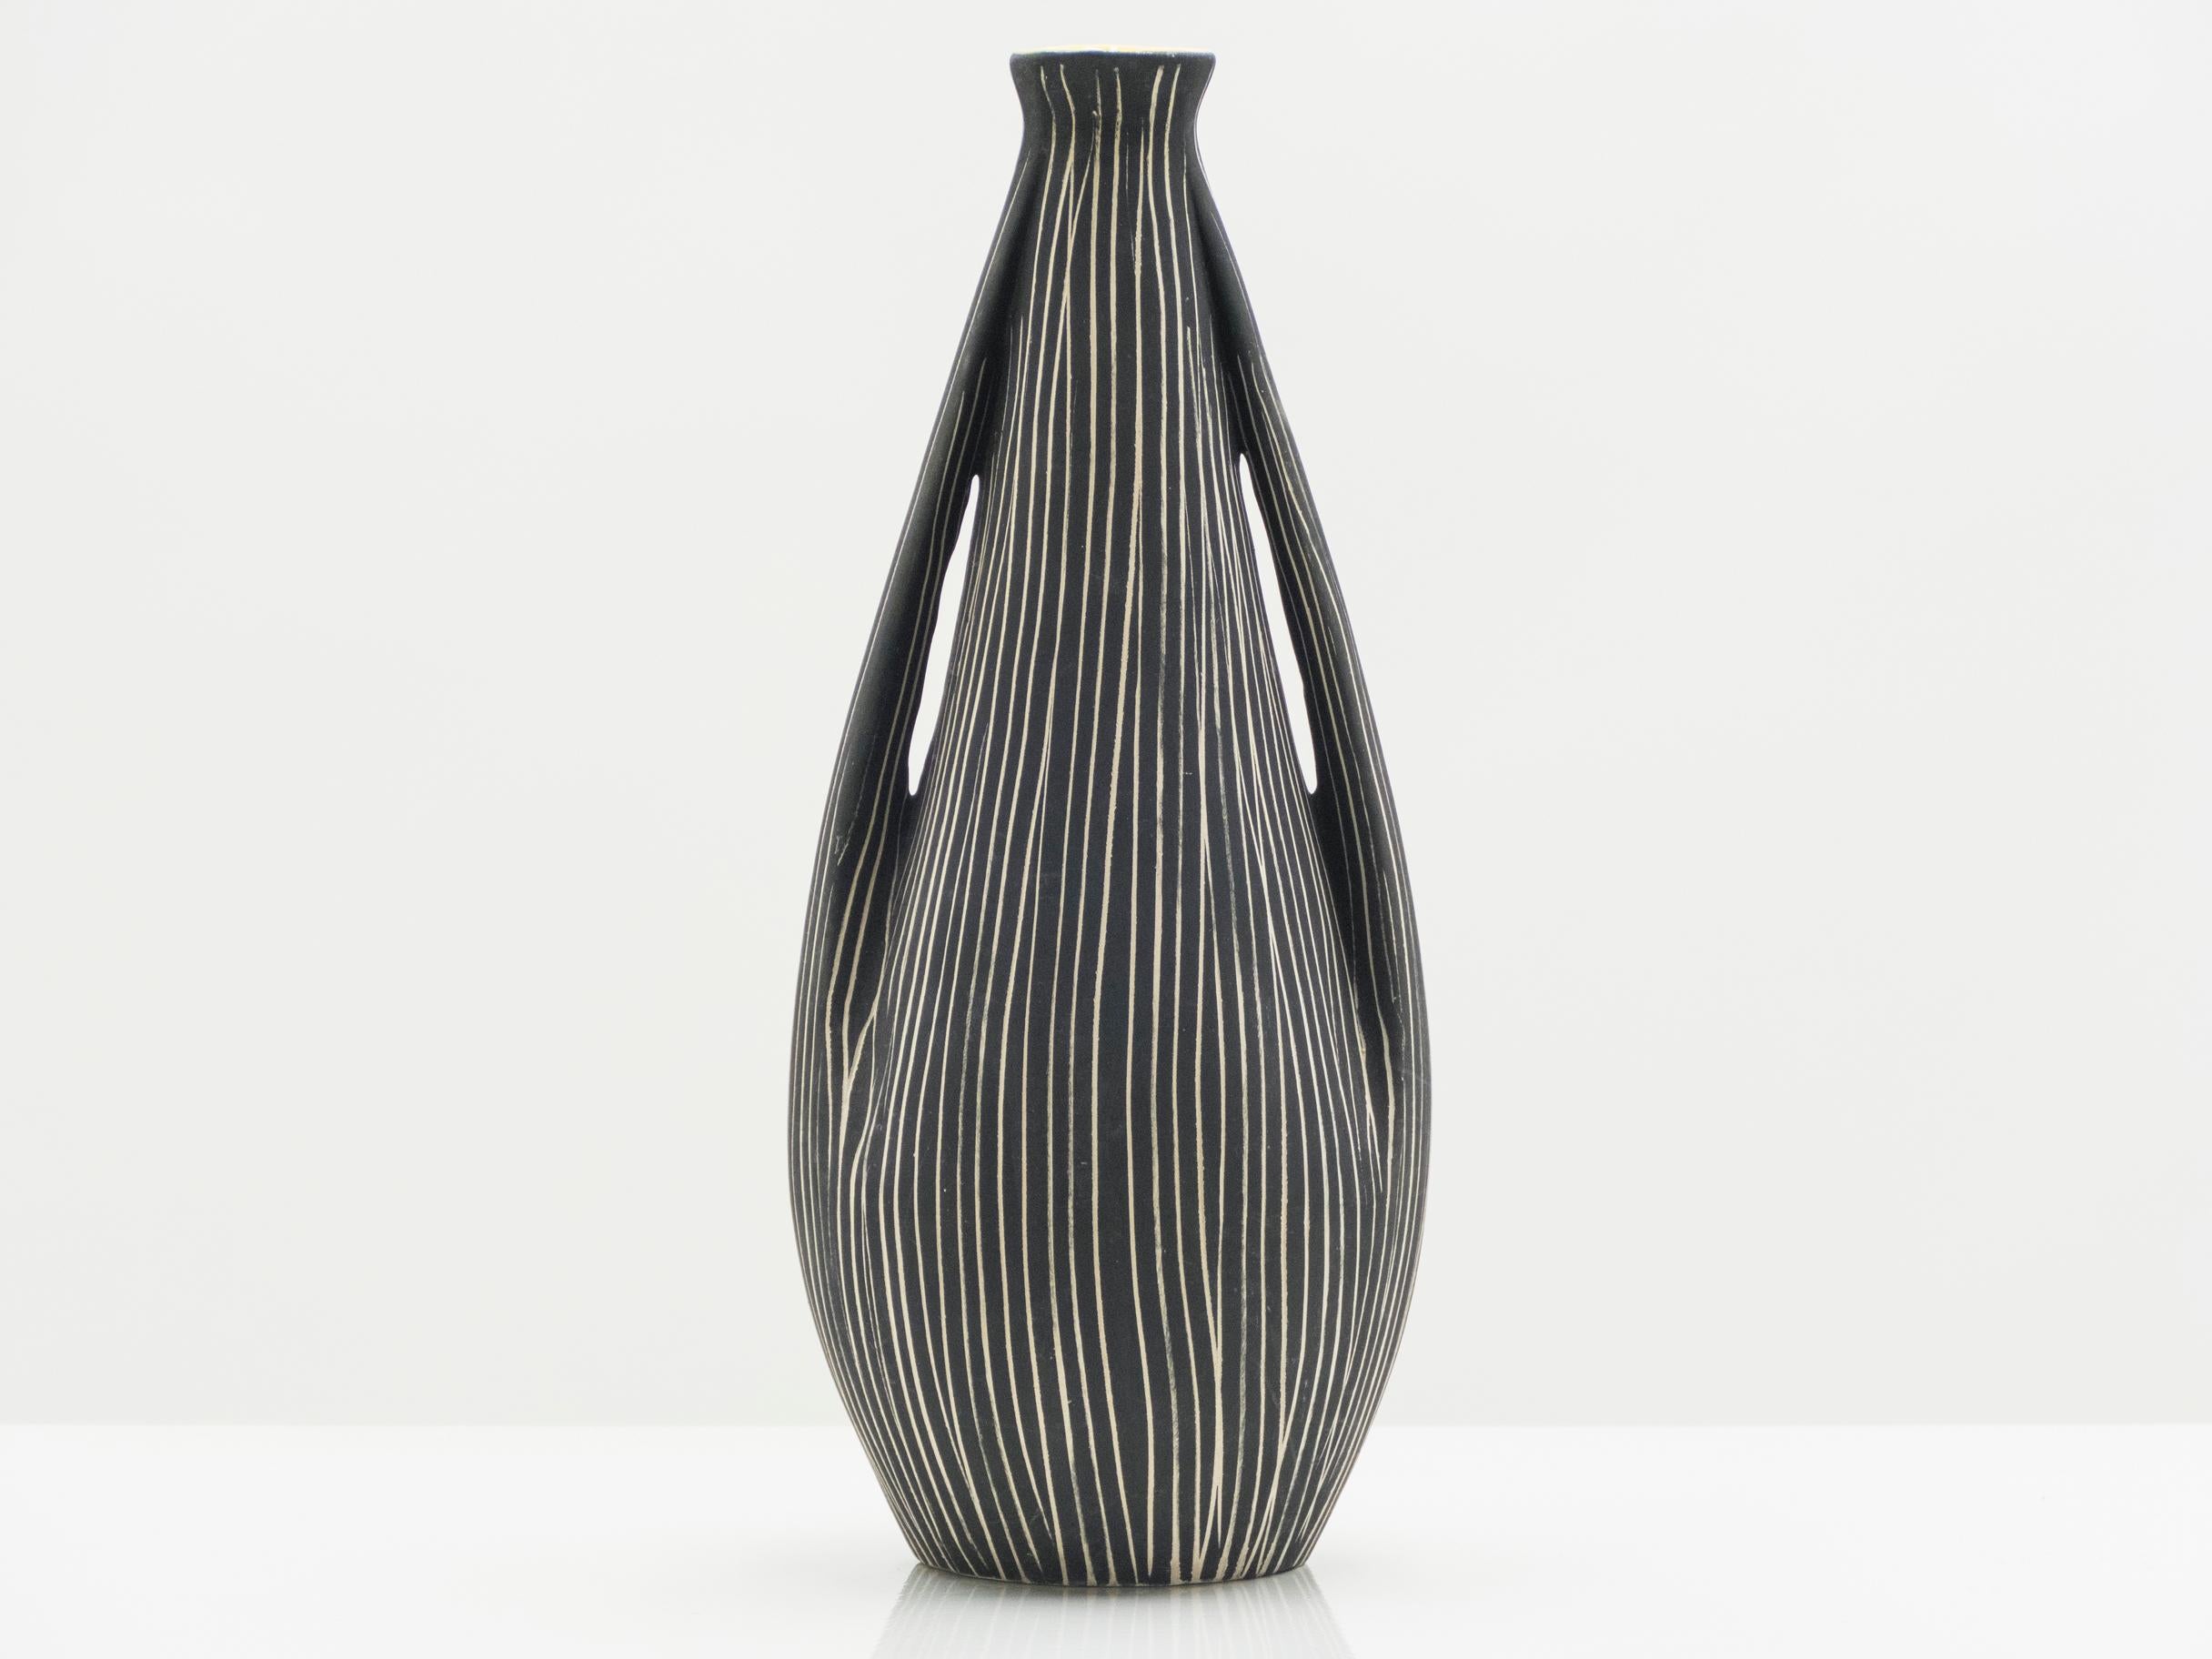 This curved Italian satin black striped ceramic and yellow enamel vase would be beautiful in any space. It was created in the early 1960s by an unknown Italian ceramicist s. With a feminine striped body and a rich yellow neck, this vase is really